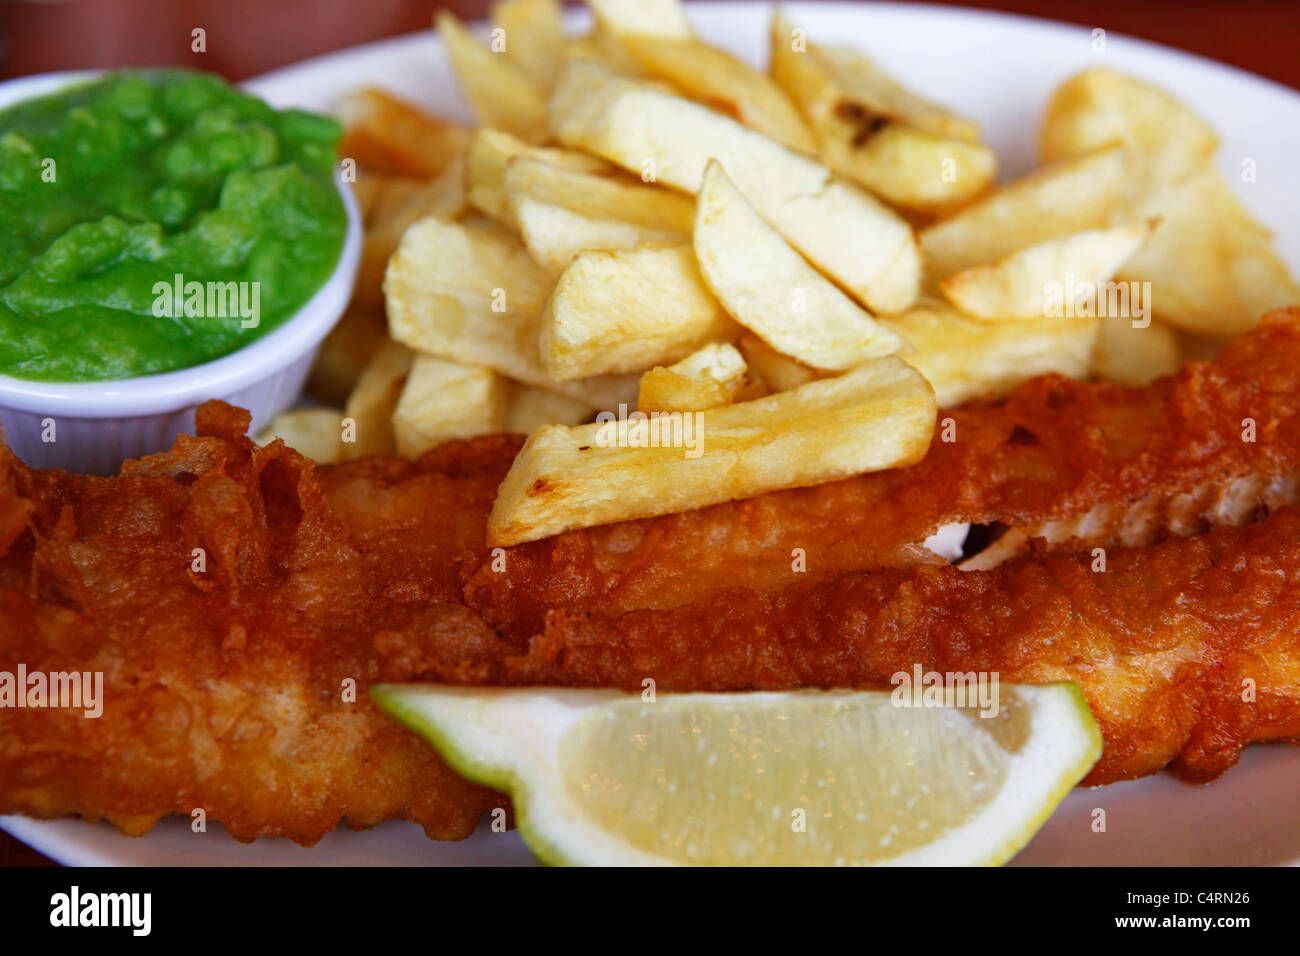 Close up of a plate of fish and chips, served with mushy peas and a wedge of lemon. Stock Photo